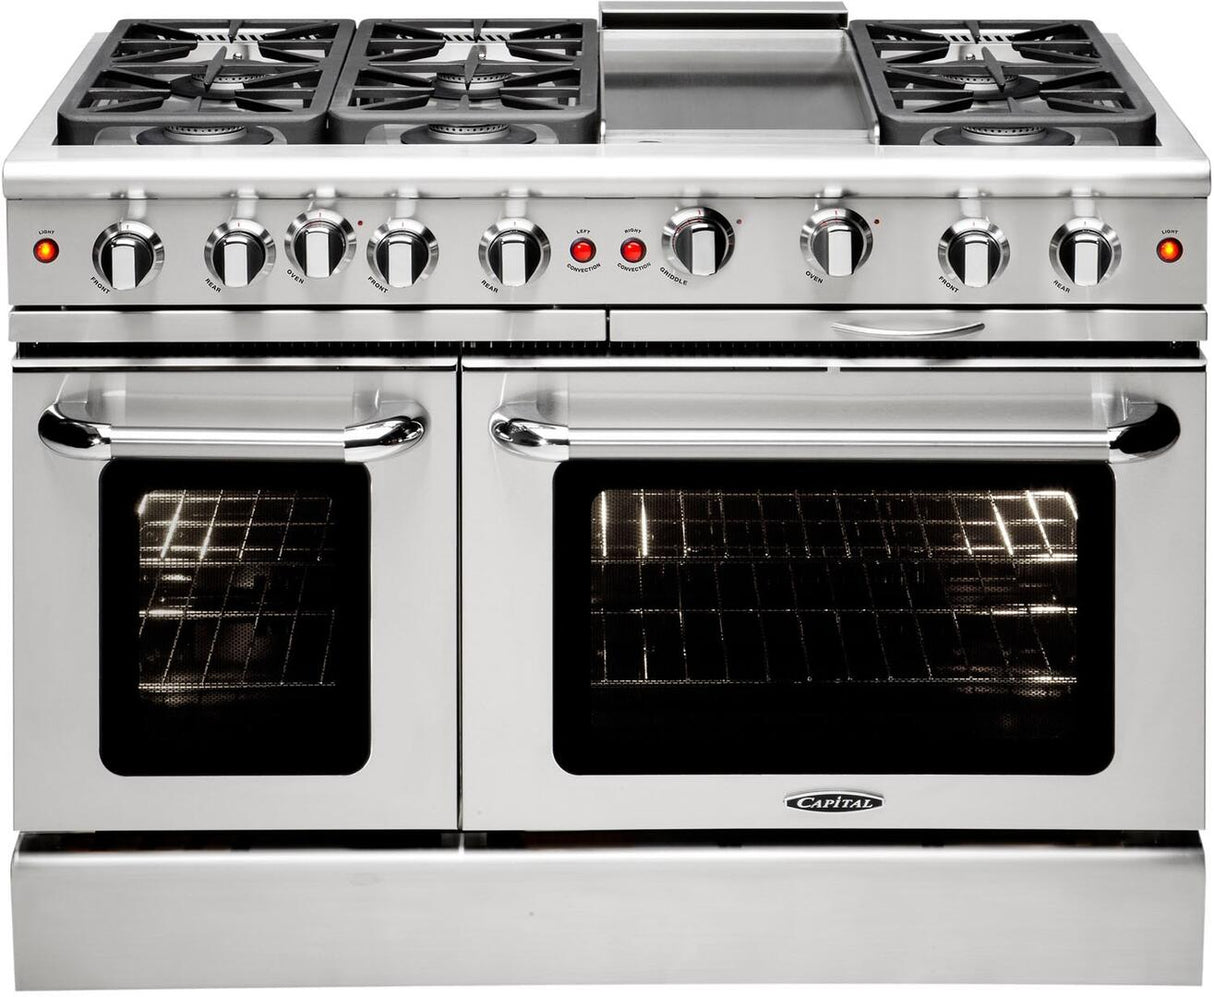 Capital Precision Series 48" Freestanding All Gas Range with 8 Sealed Burners, Optional Griddle/Grill, 4.9 cu. ft. Total Capacity Double Oven in Stainless Steel (MCR488) Ranges Capital Natural Gas 6 Sealed Burners and Griddle 